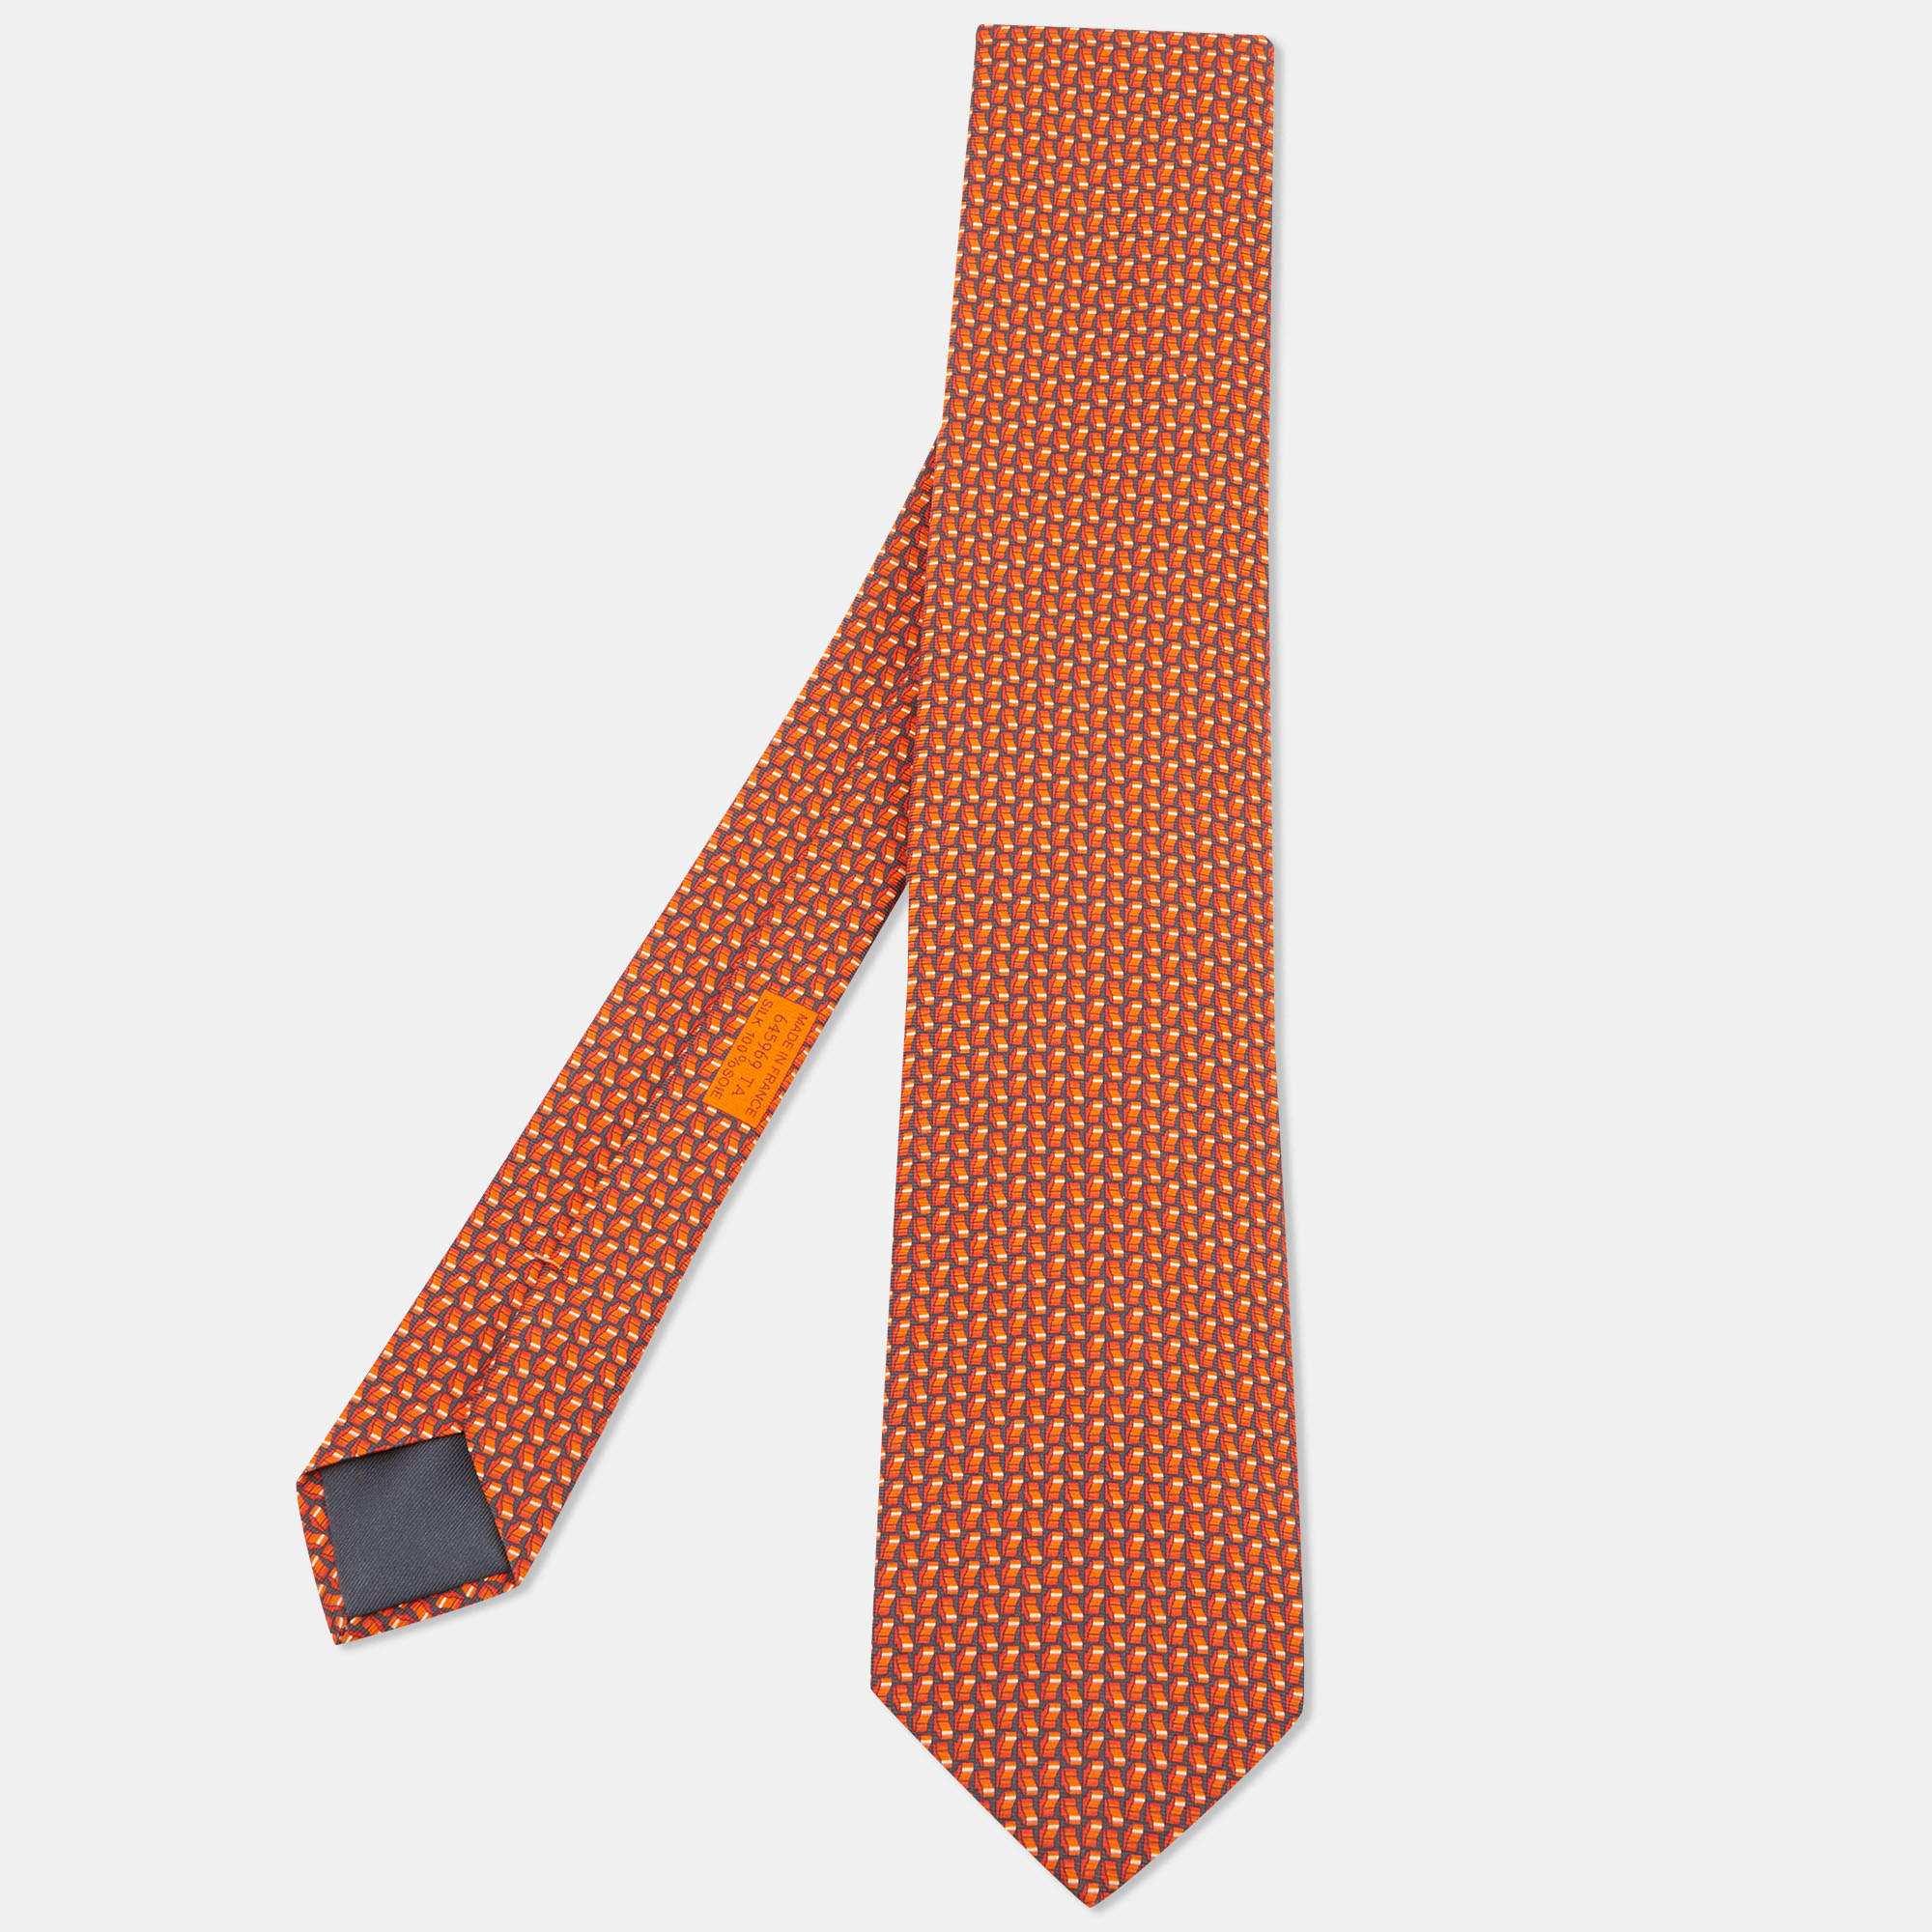 Is this Hermes and YSL tie real?